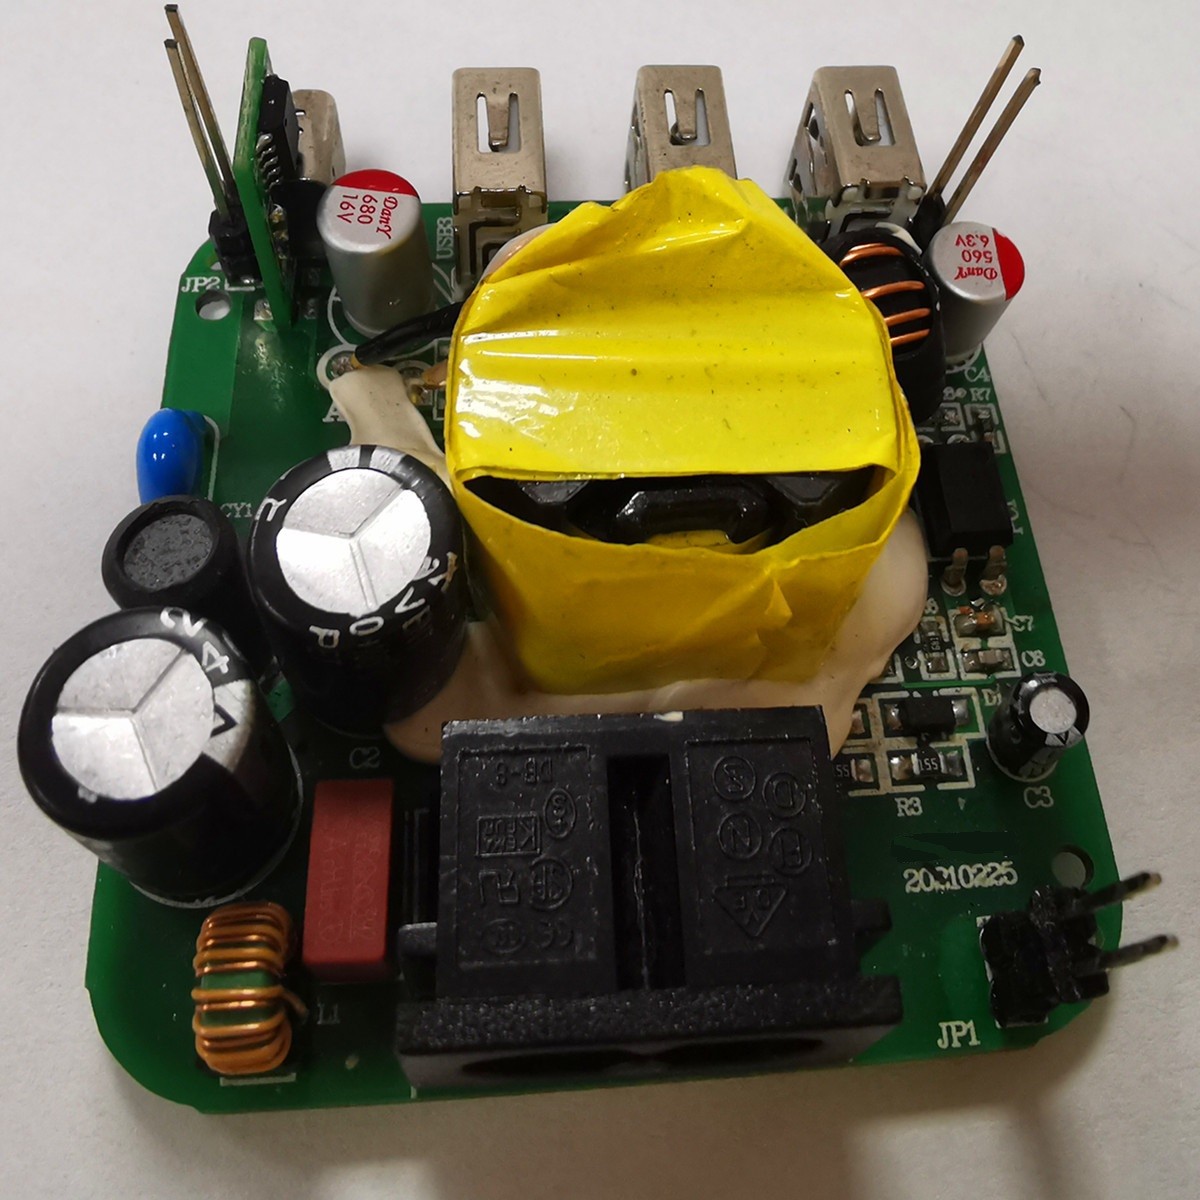 ps35801618-multi_usb_charger_electronic_board_assembly_mobile_charge_pcba_board_service_manufacturer